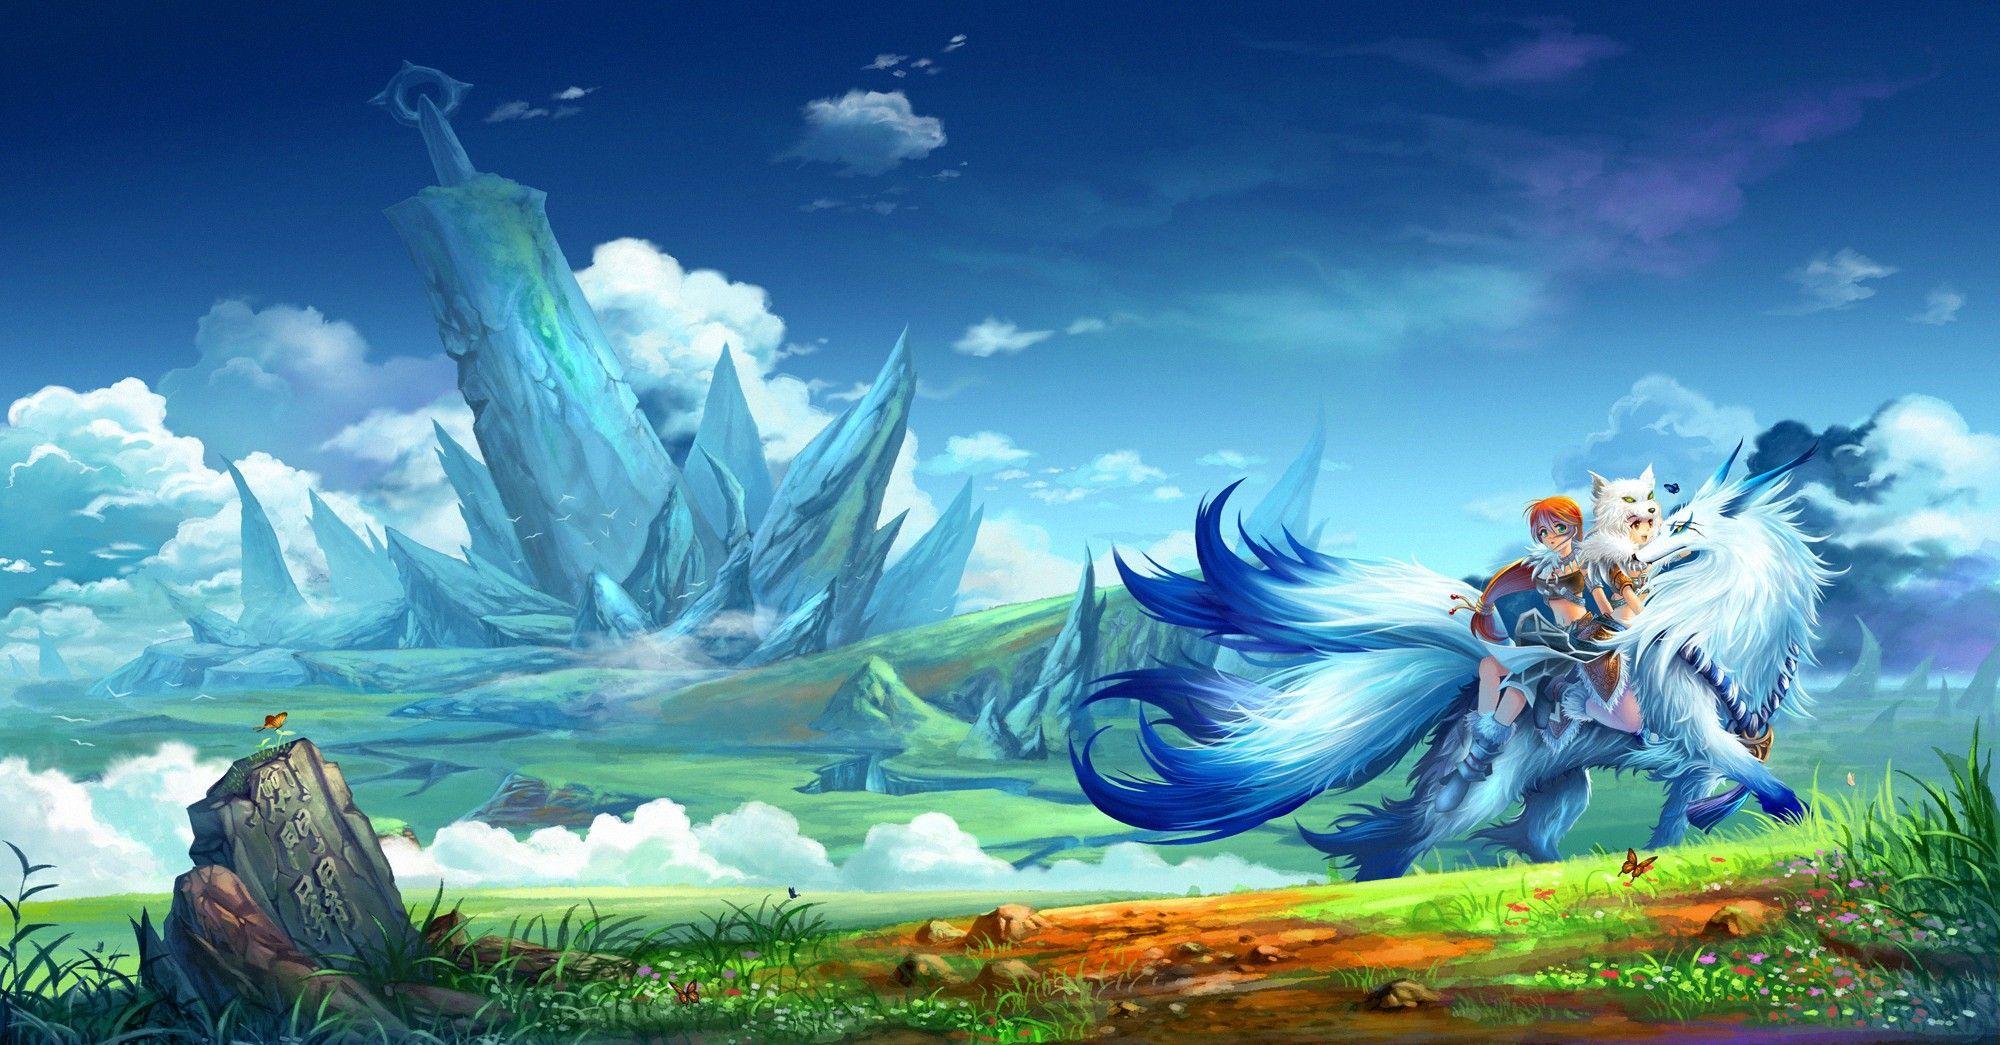 Anime Fantasy Wallpapers Top Free Anime Fantasy Backgrounds Wallpaperaccess